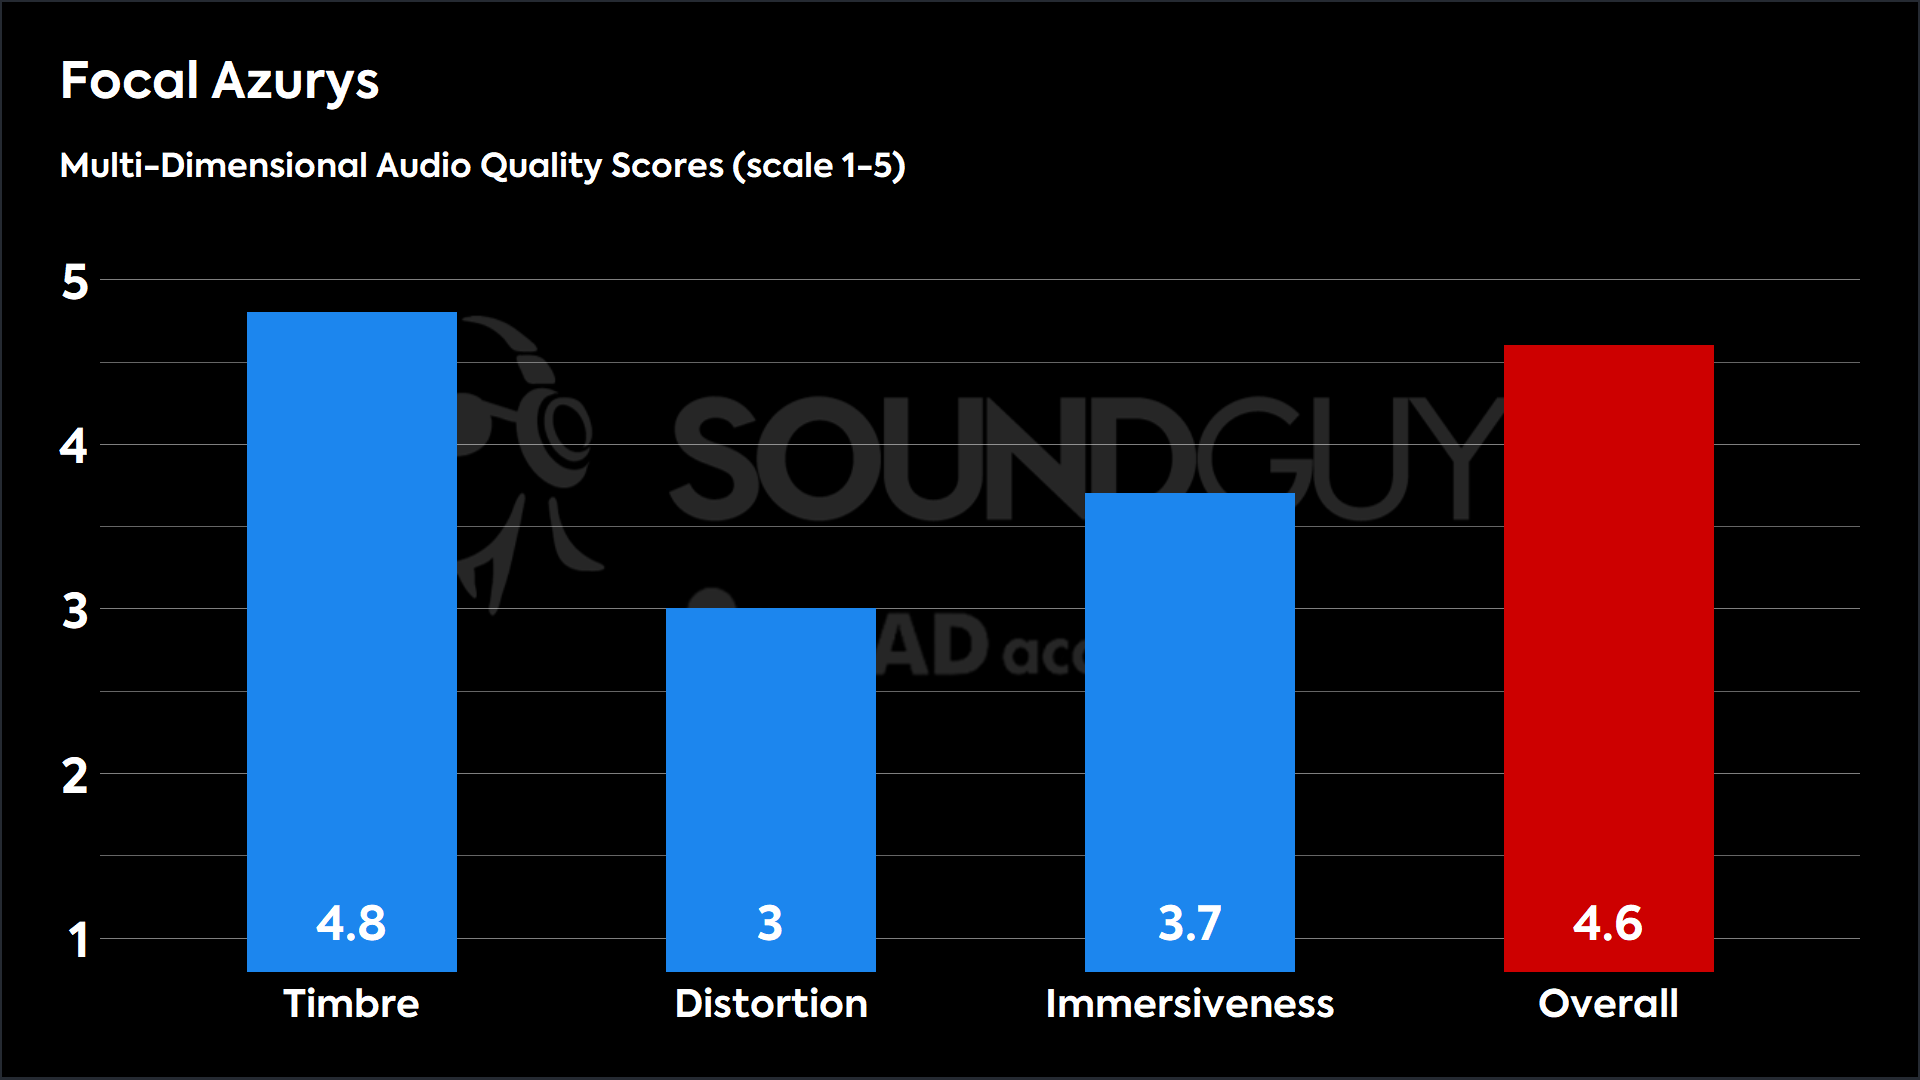 This chart shows the MDAQS results for the Focal Azurys in Default mode. The Timbre score is 4.8, The Distortion score is 3, the Immersiveness score is 3.7, and the Overall Score is 4.6).